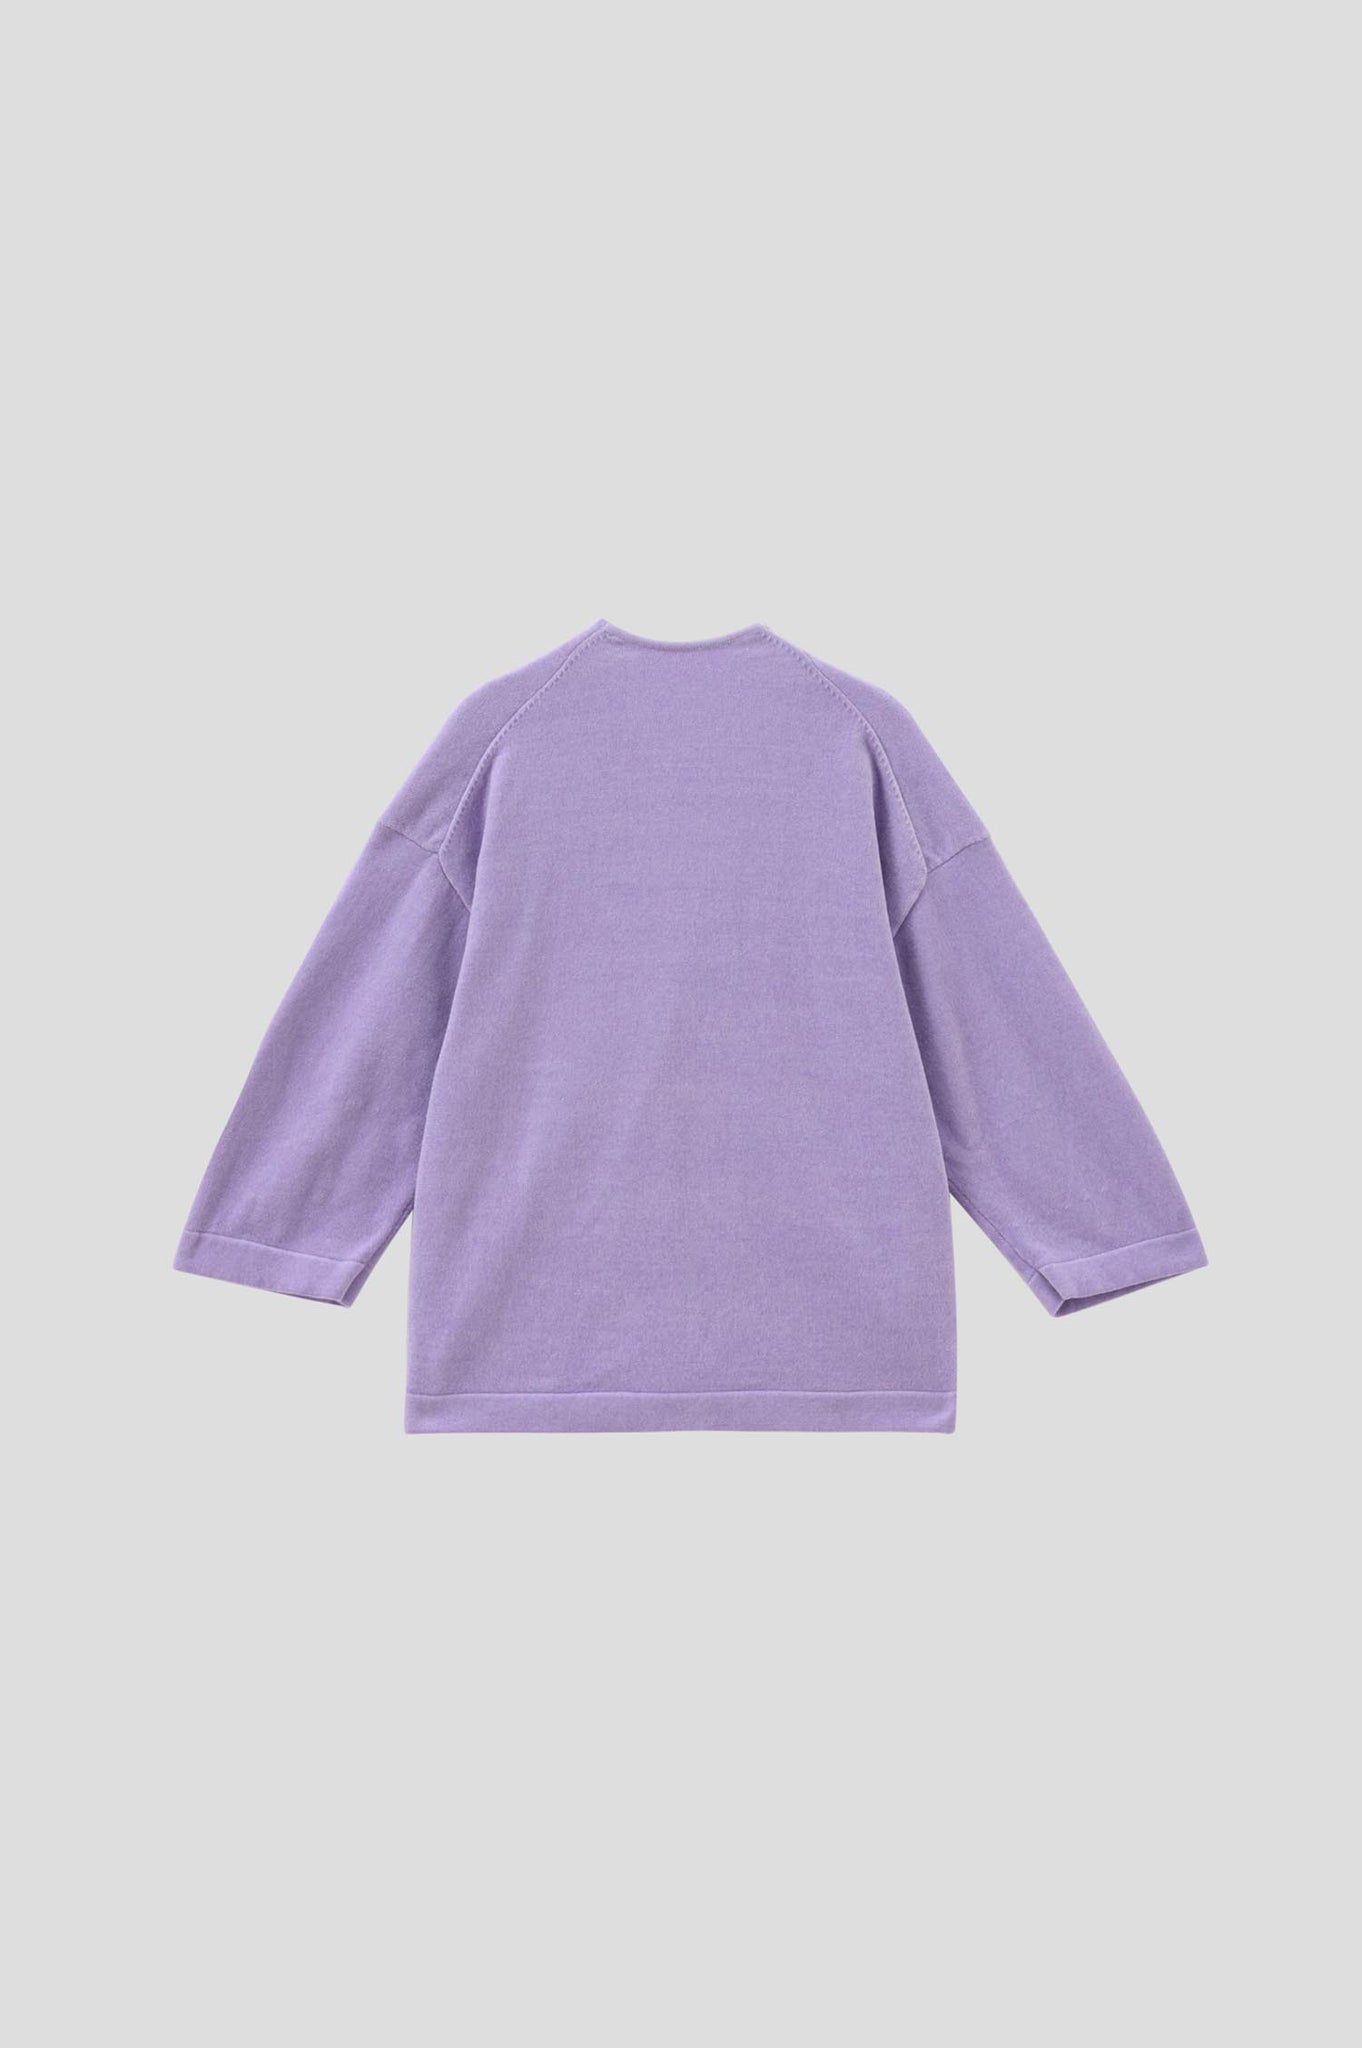 Sweater / JNBYHOME Kids' Loose Fit Pullover Crewneck Sweater